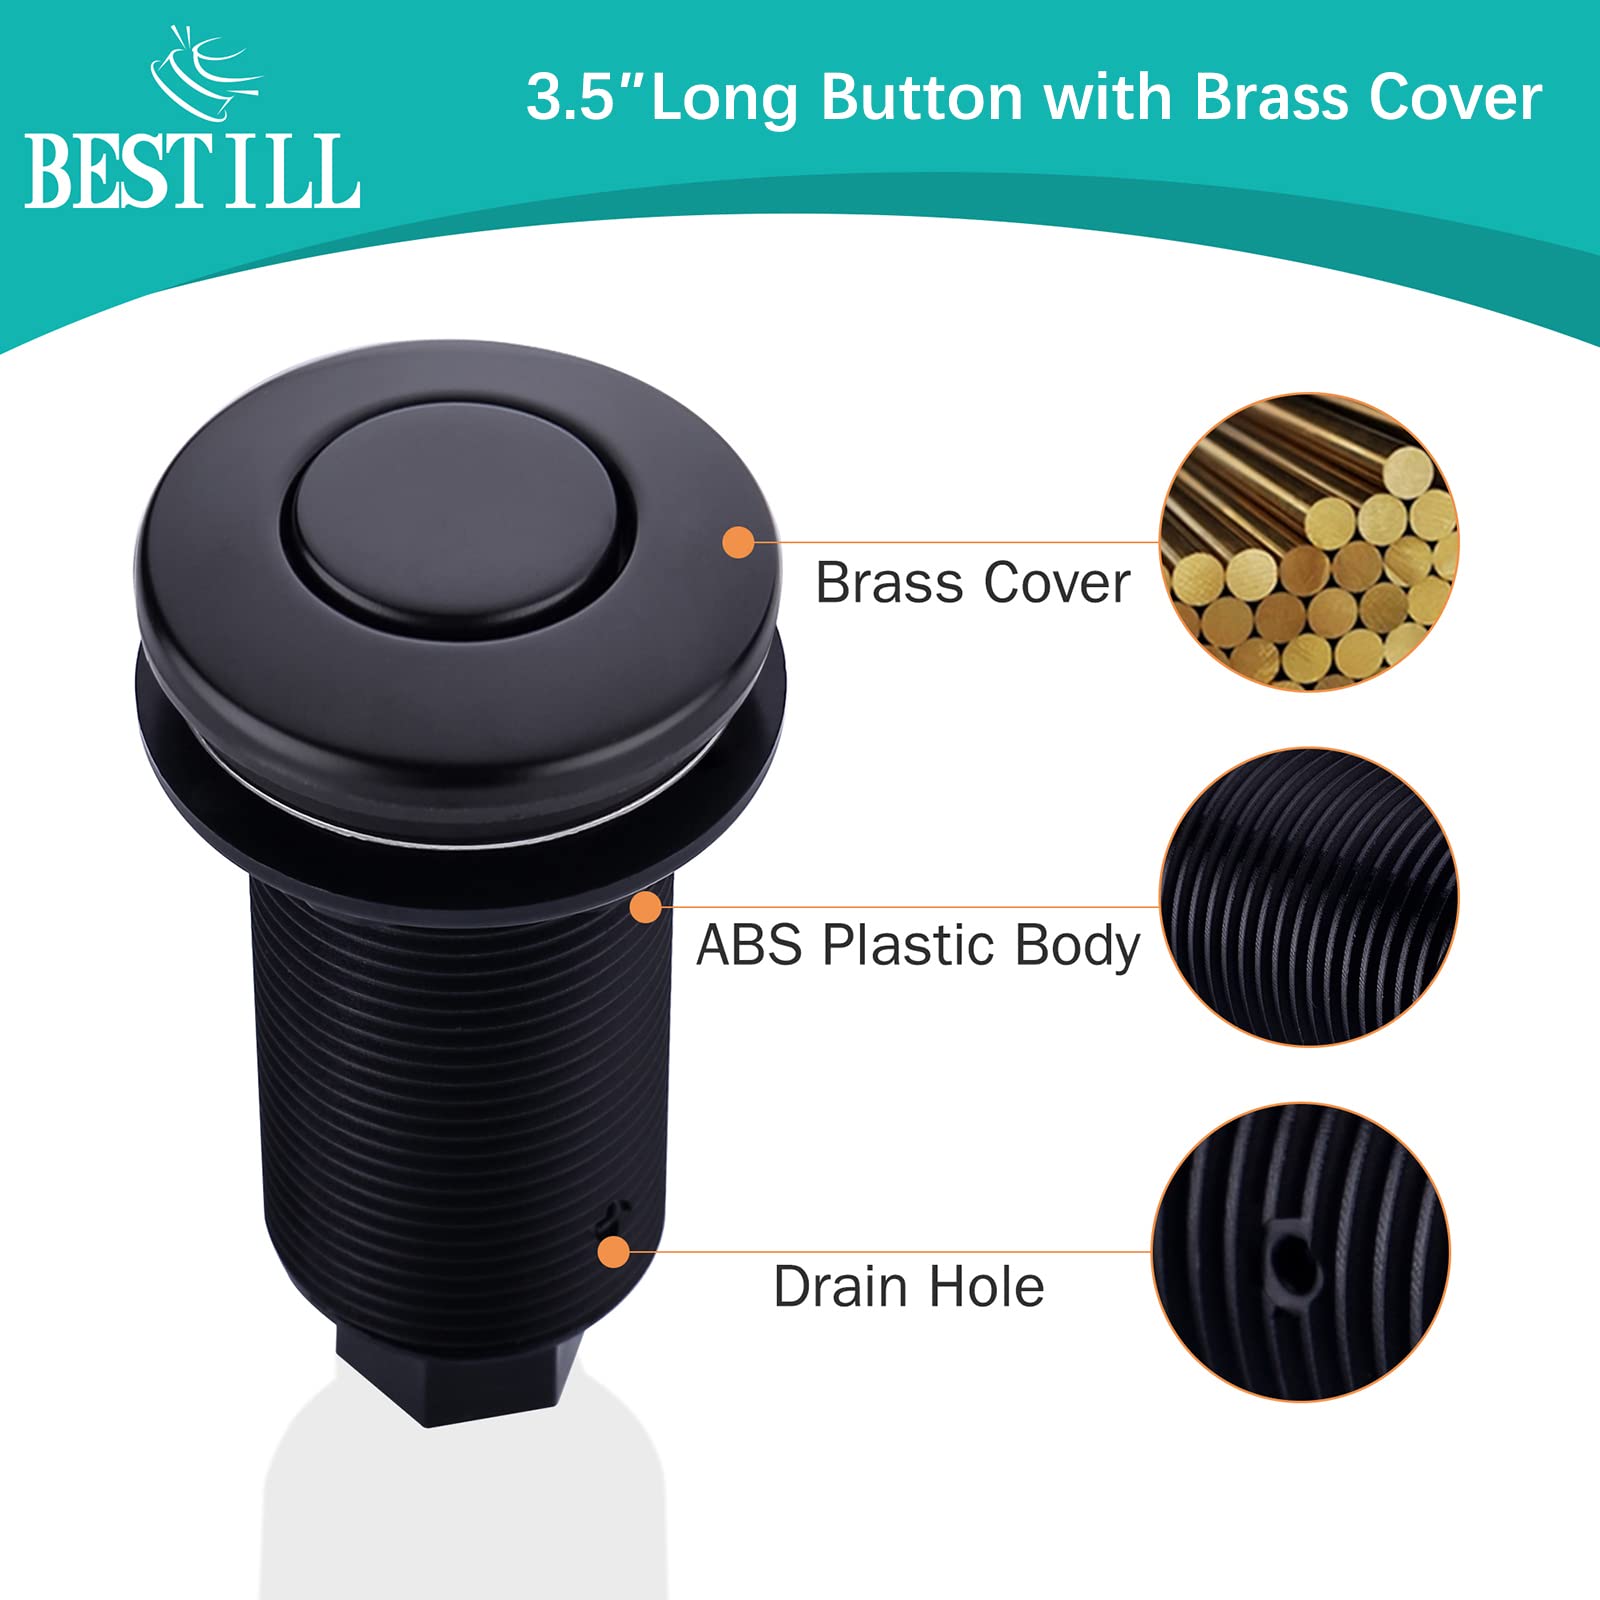 BESTILL Sink Top Air Switch Kit for Garbage Disposal, Matte Black Long Push Button with Brass Cover, UL Listed(E530042) Dual Outlet Power Module